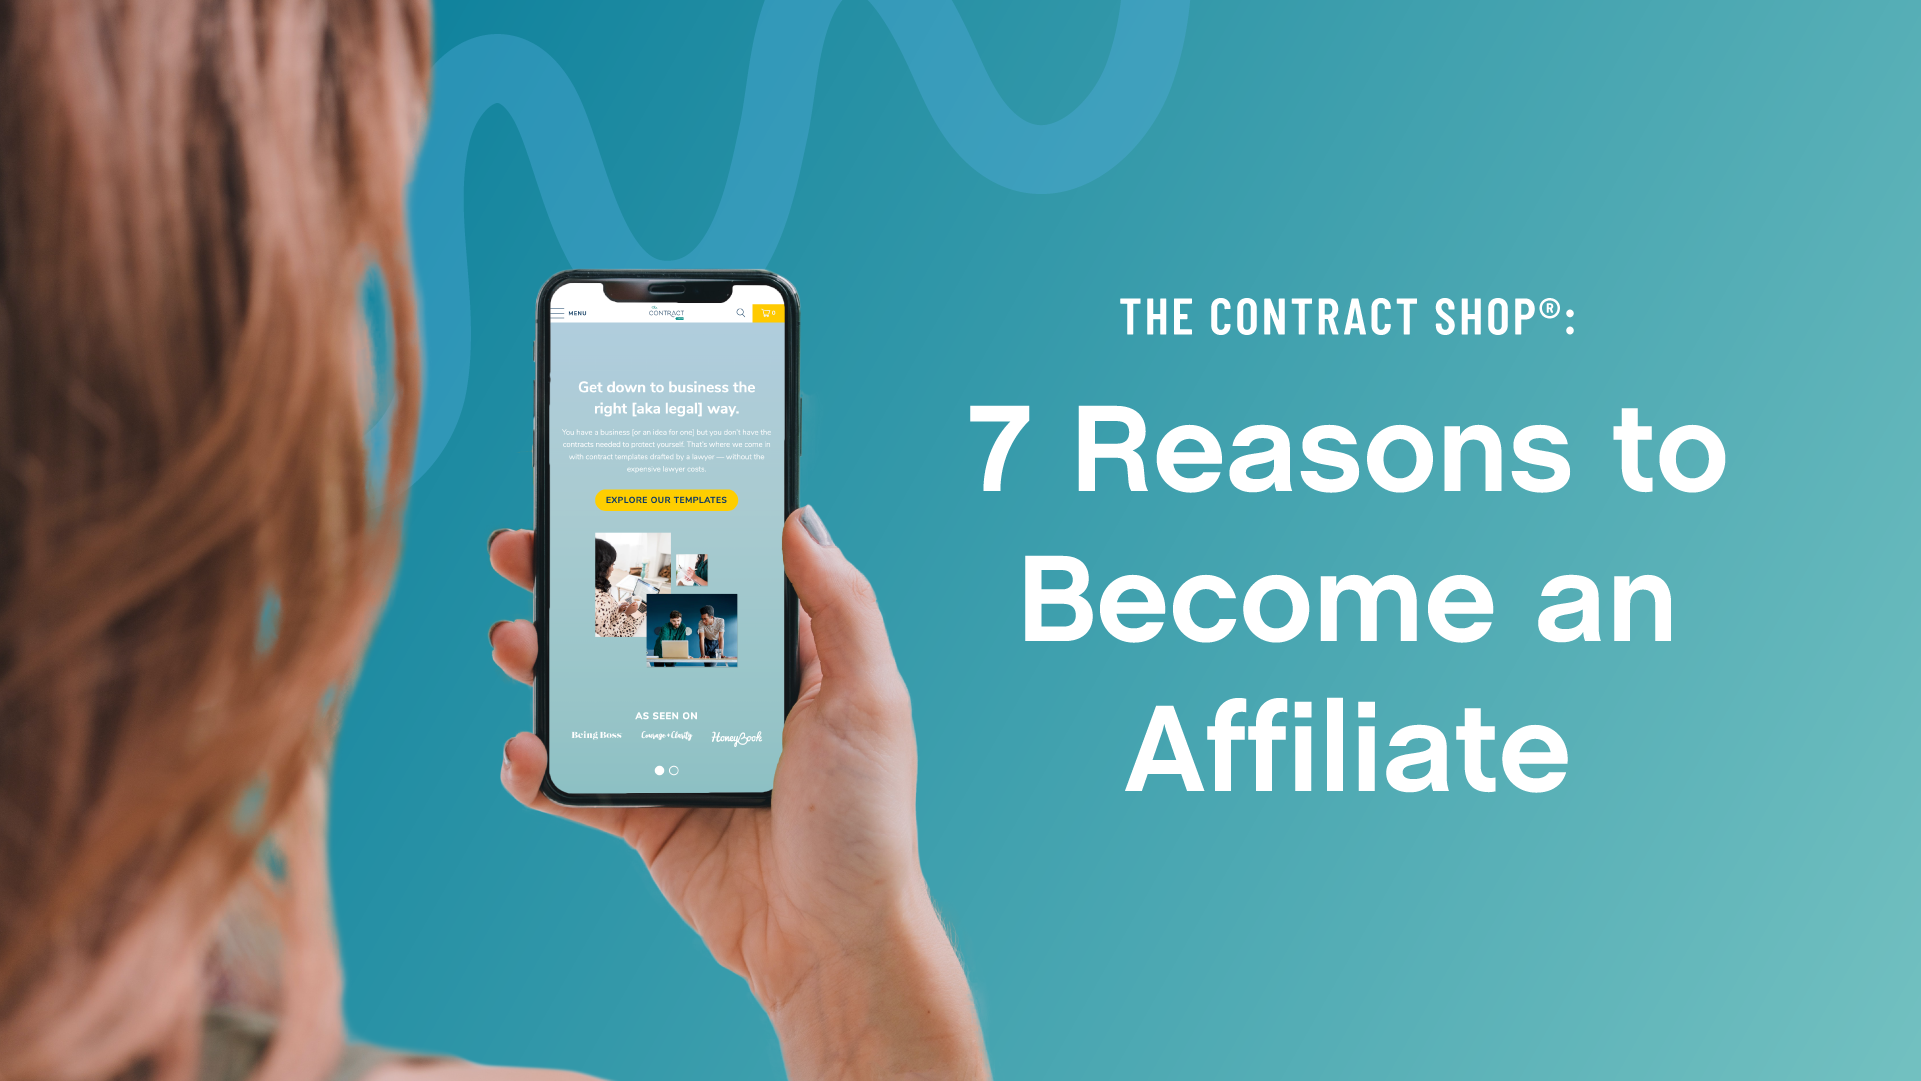 The Contract Shop® Affiliate - 7 Reasons to Become One